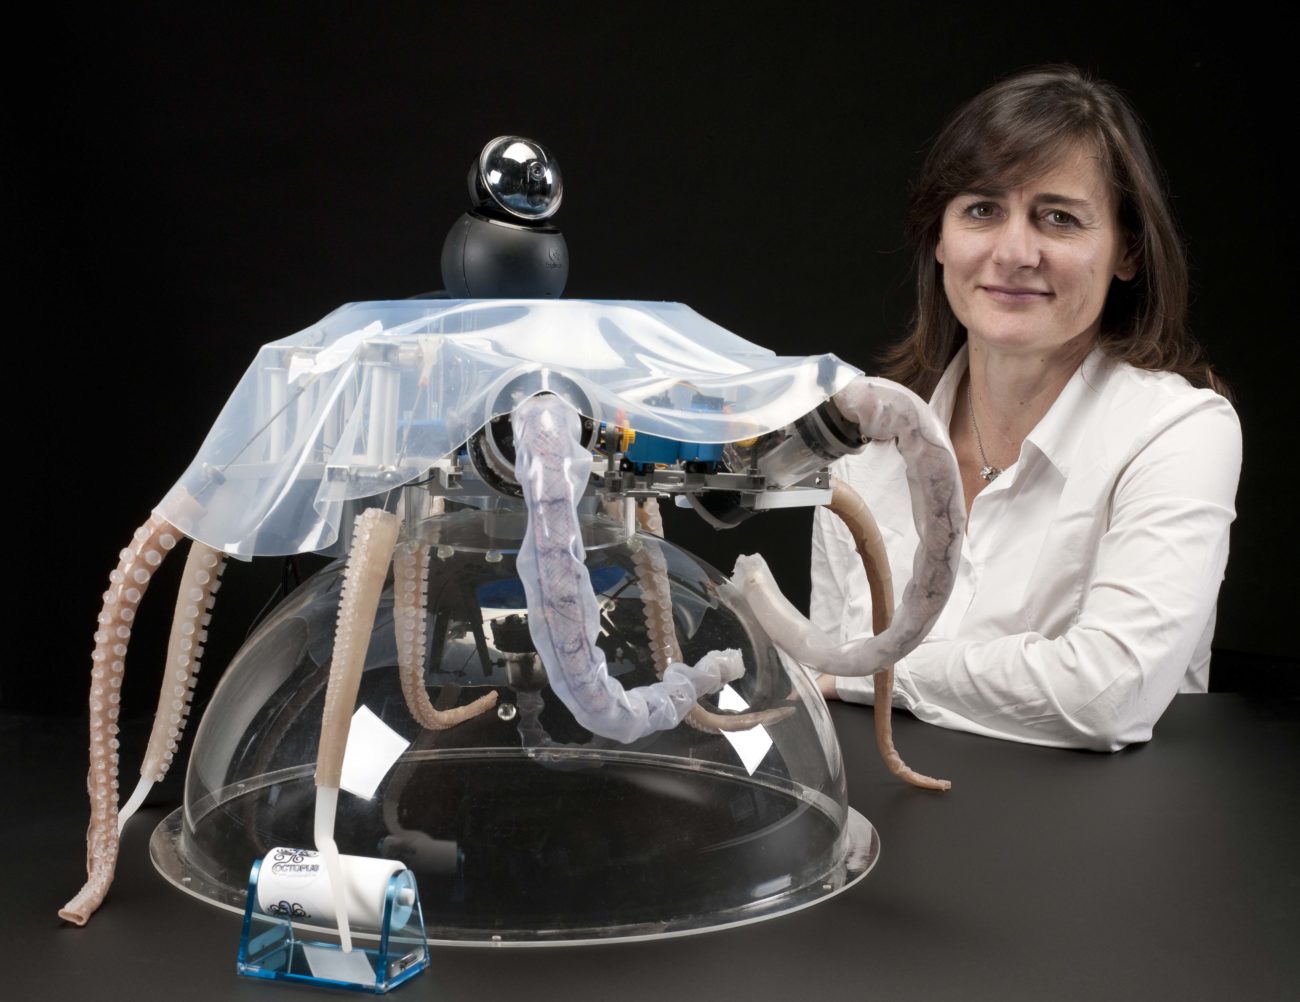 Cecilia Laschi (Associate Professor of Biomedical Engineering at Scuola Superiore Sant'Anna Educational Institute, Pisa, Italy one of the Project Octopus scientists. The life-like Octobot can sense, squeeze and grab objects - just like a real octopus the robot's abilities mean it could be used to repair underwater structures like oil pipelines - or even perform marine search and rescue. Studio portrait with Octobot against black background.